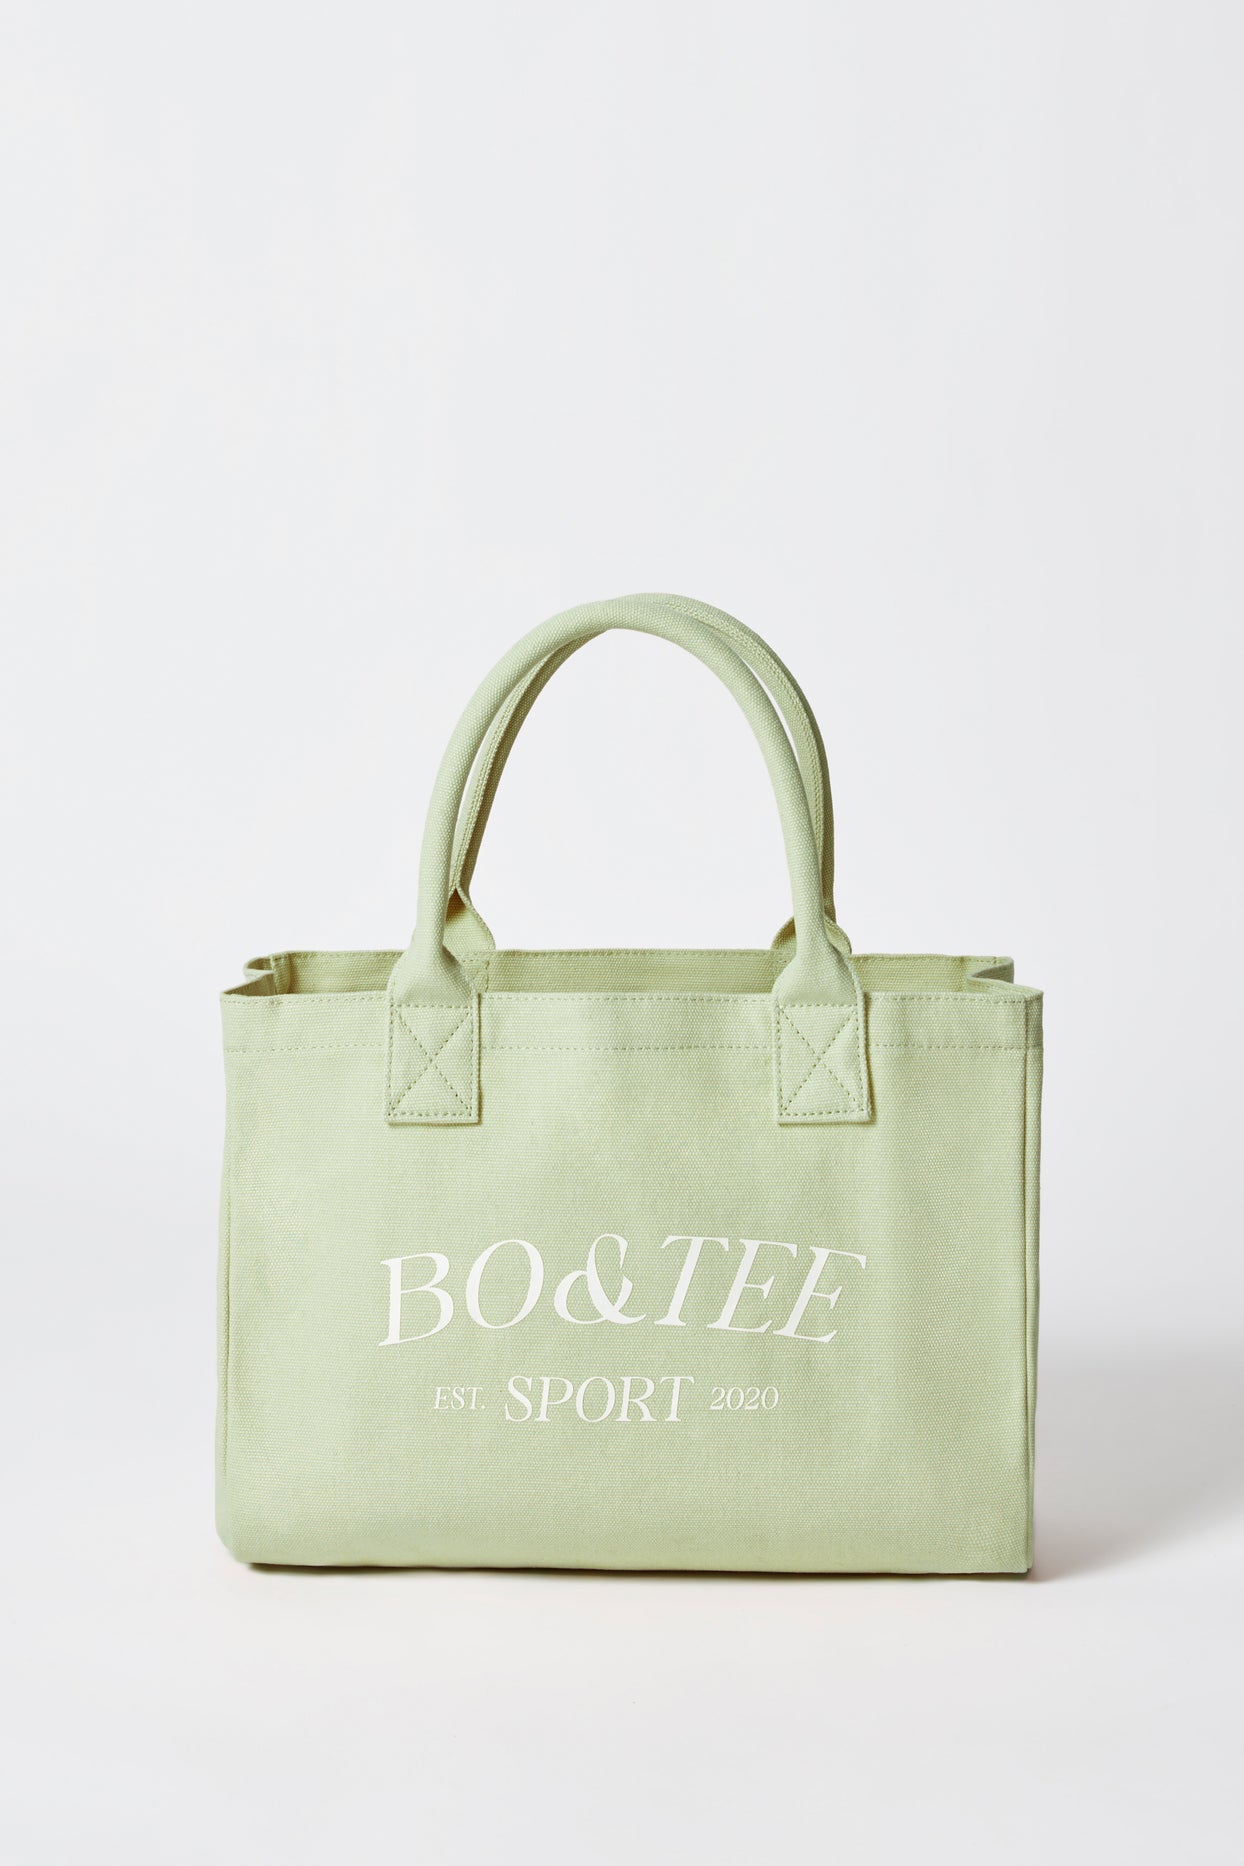 Small Canvas Tote Bag in Lime Green